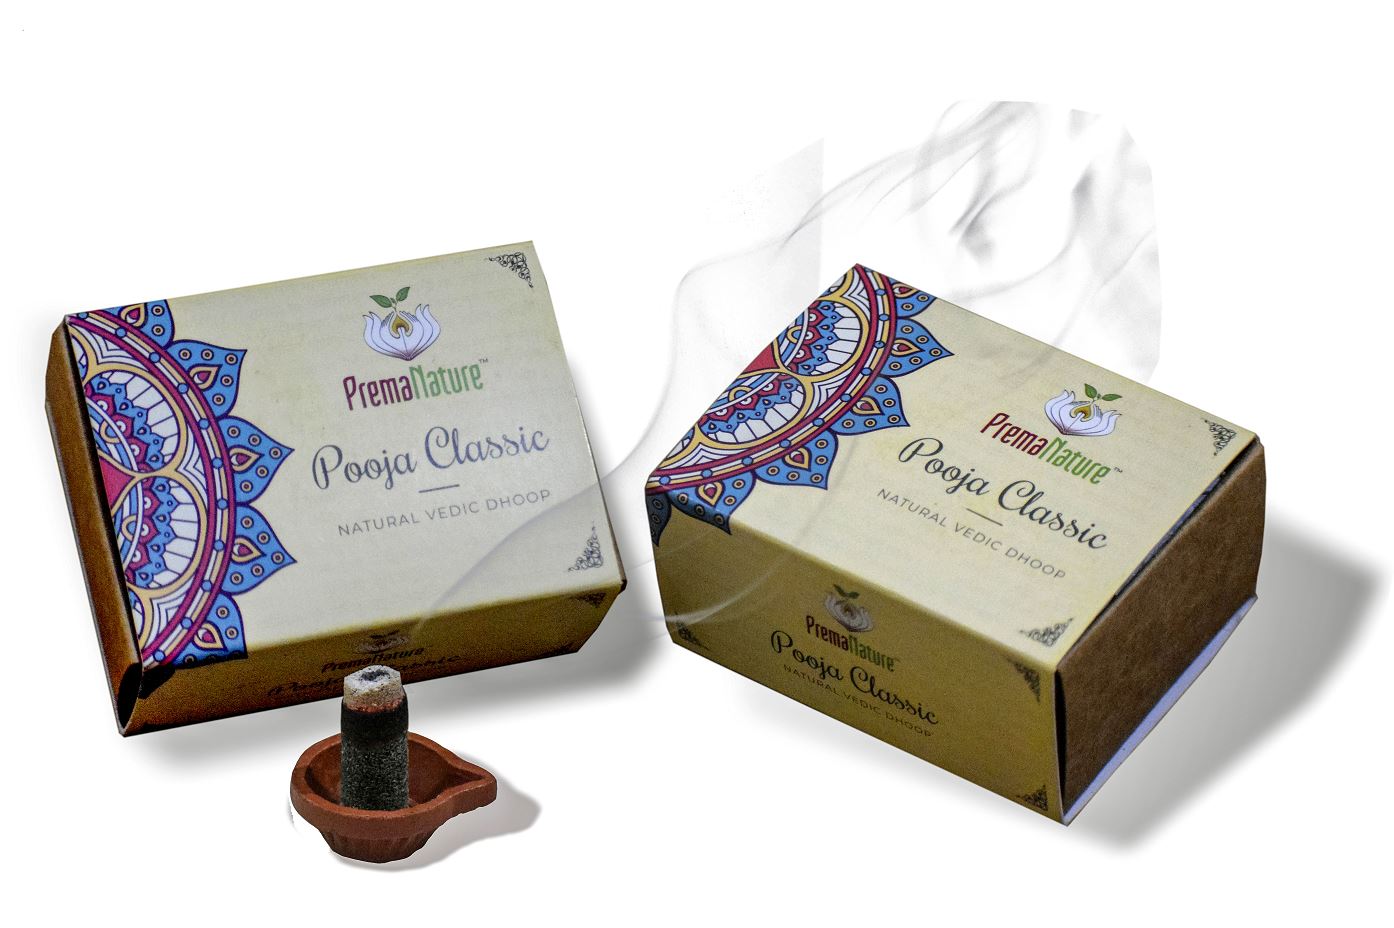 Pooja Classic - Dhoop Sticks from PremaNature